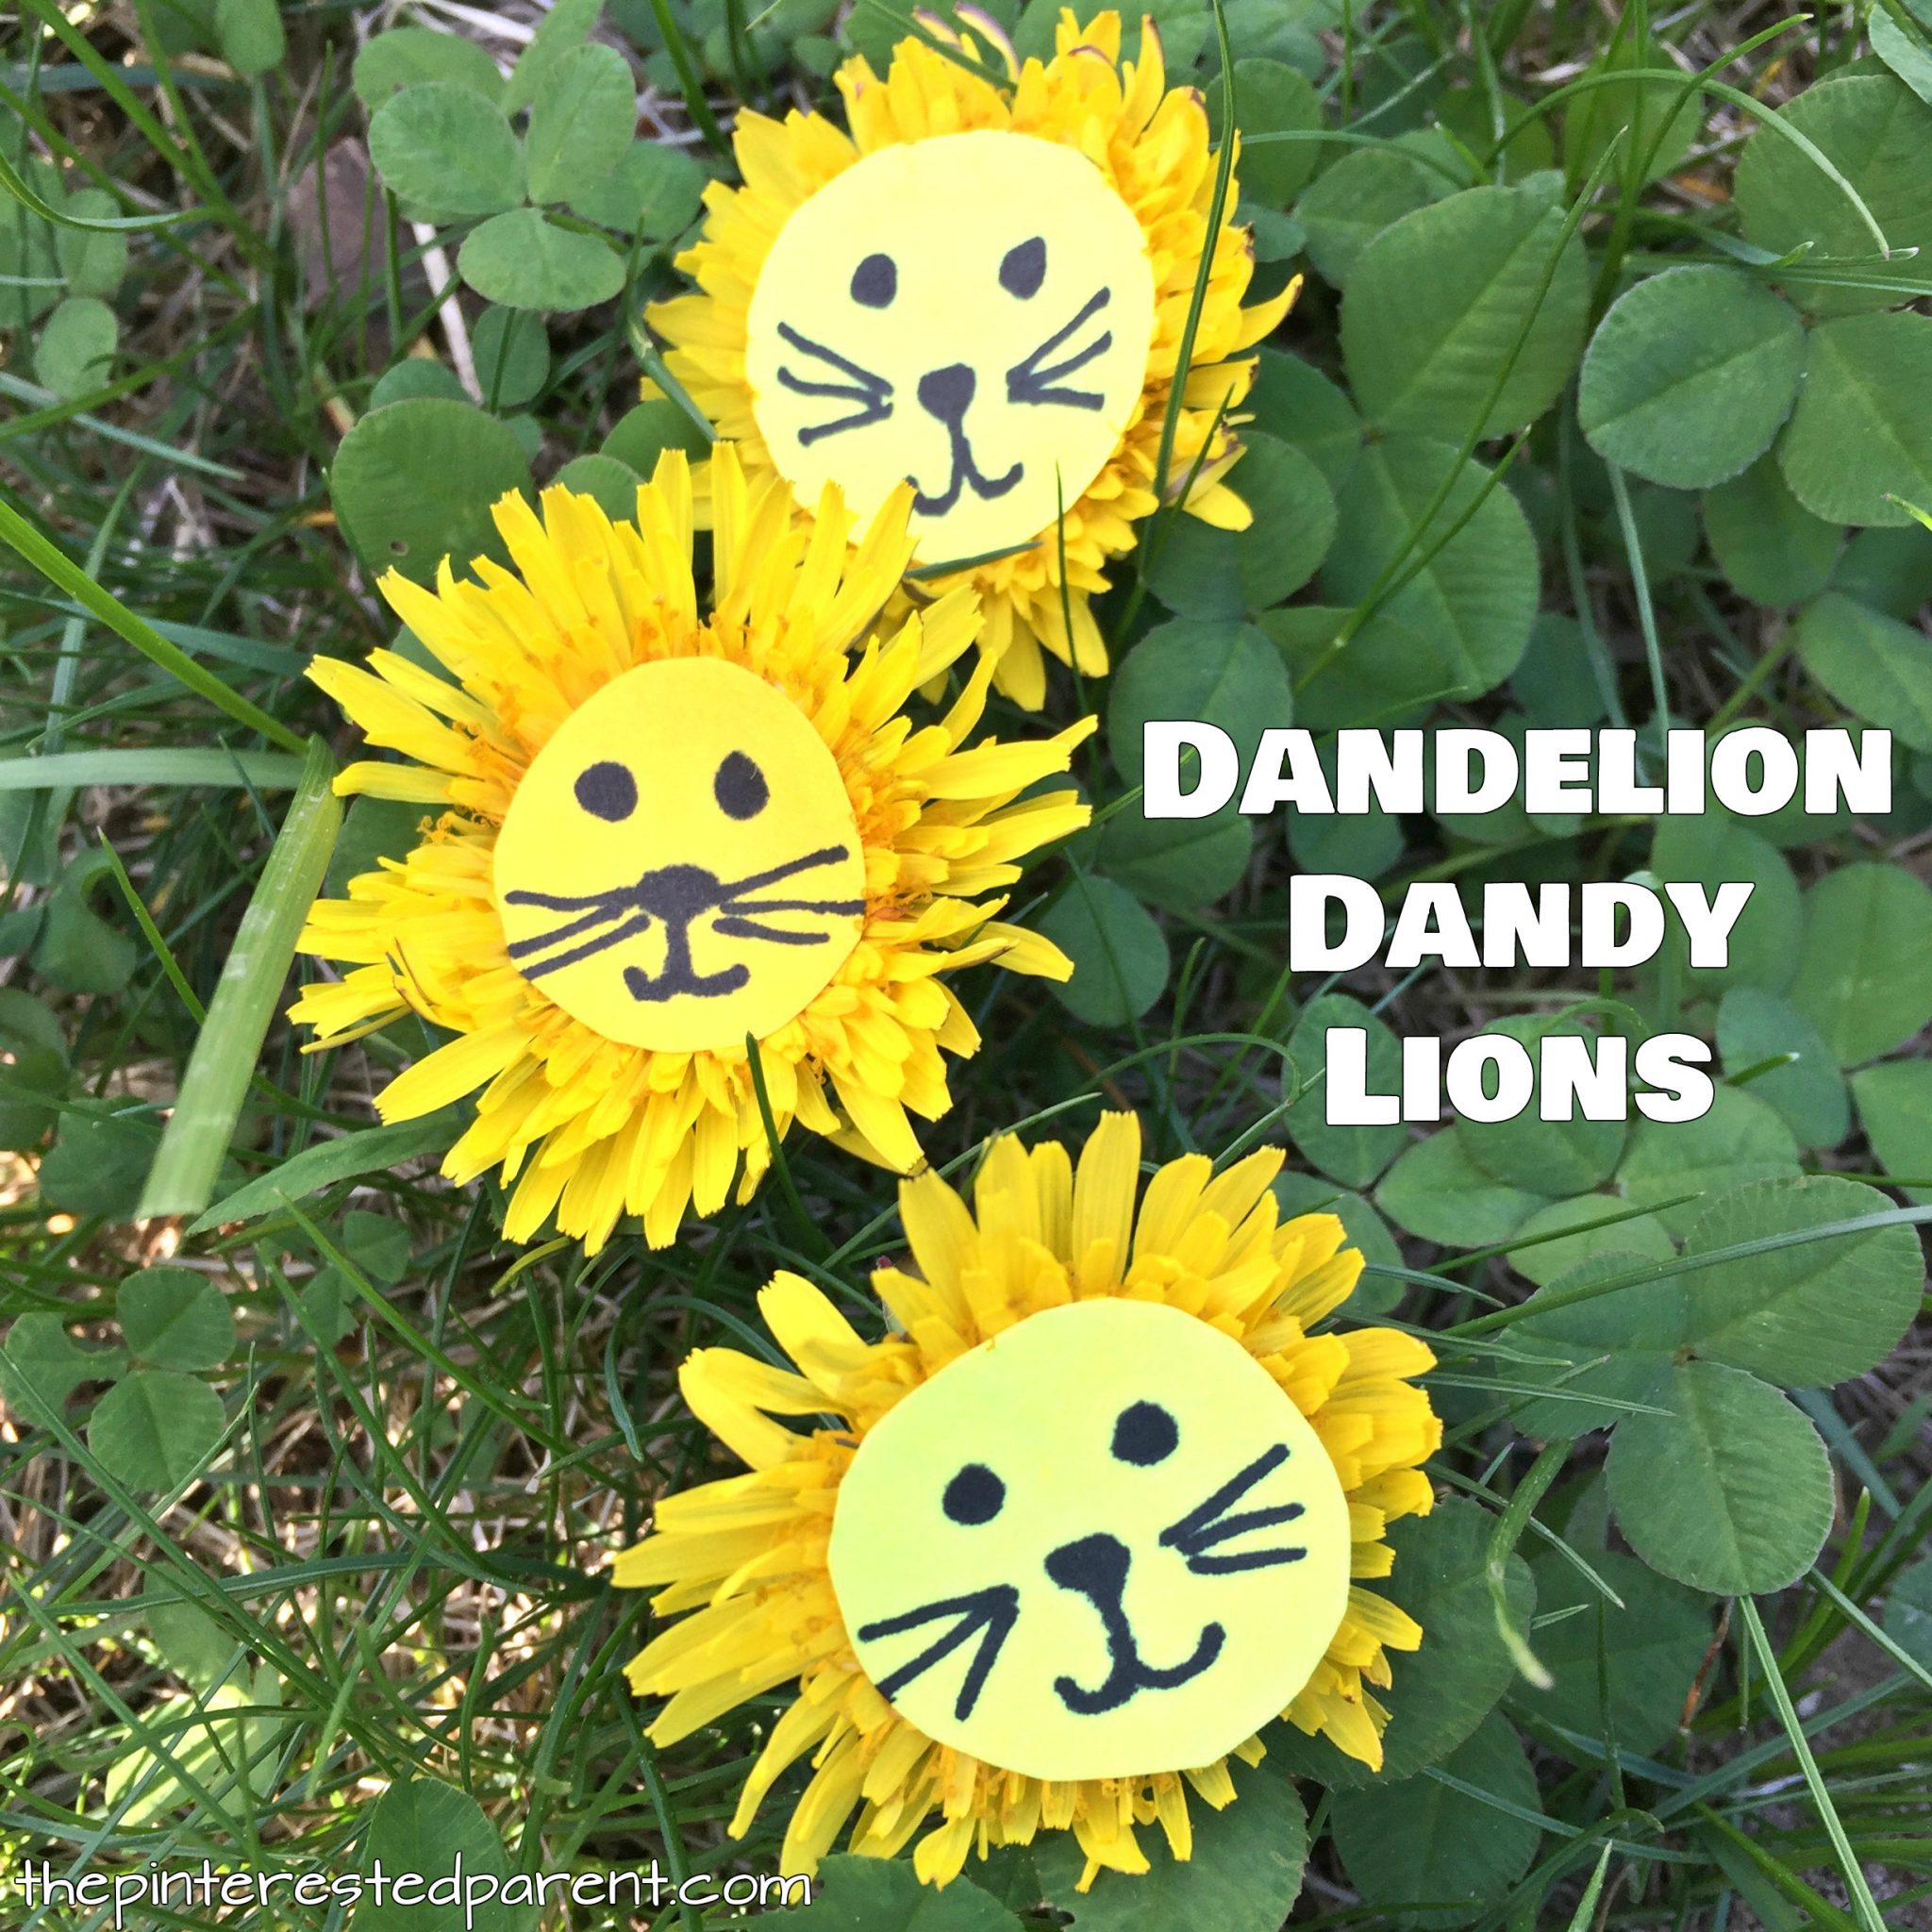 Dandelion Lions - Easy nature arts and crafts for kids. Flower craft ideas for the spring and summer